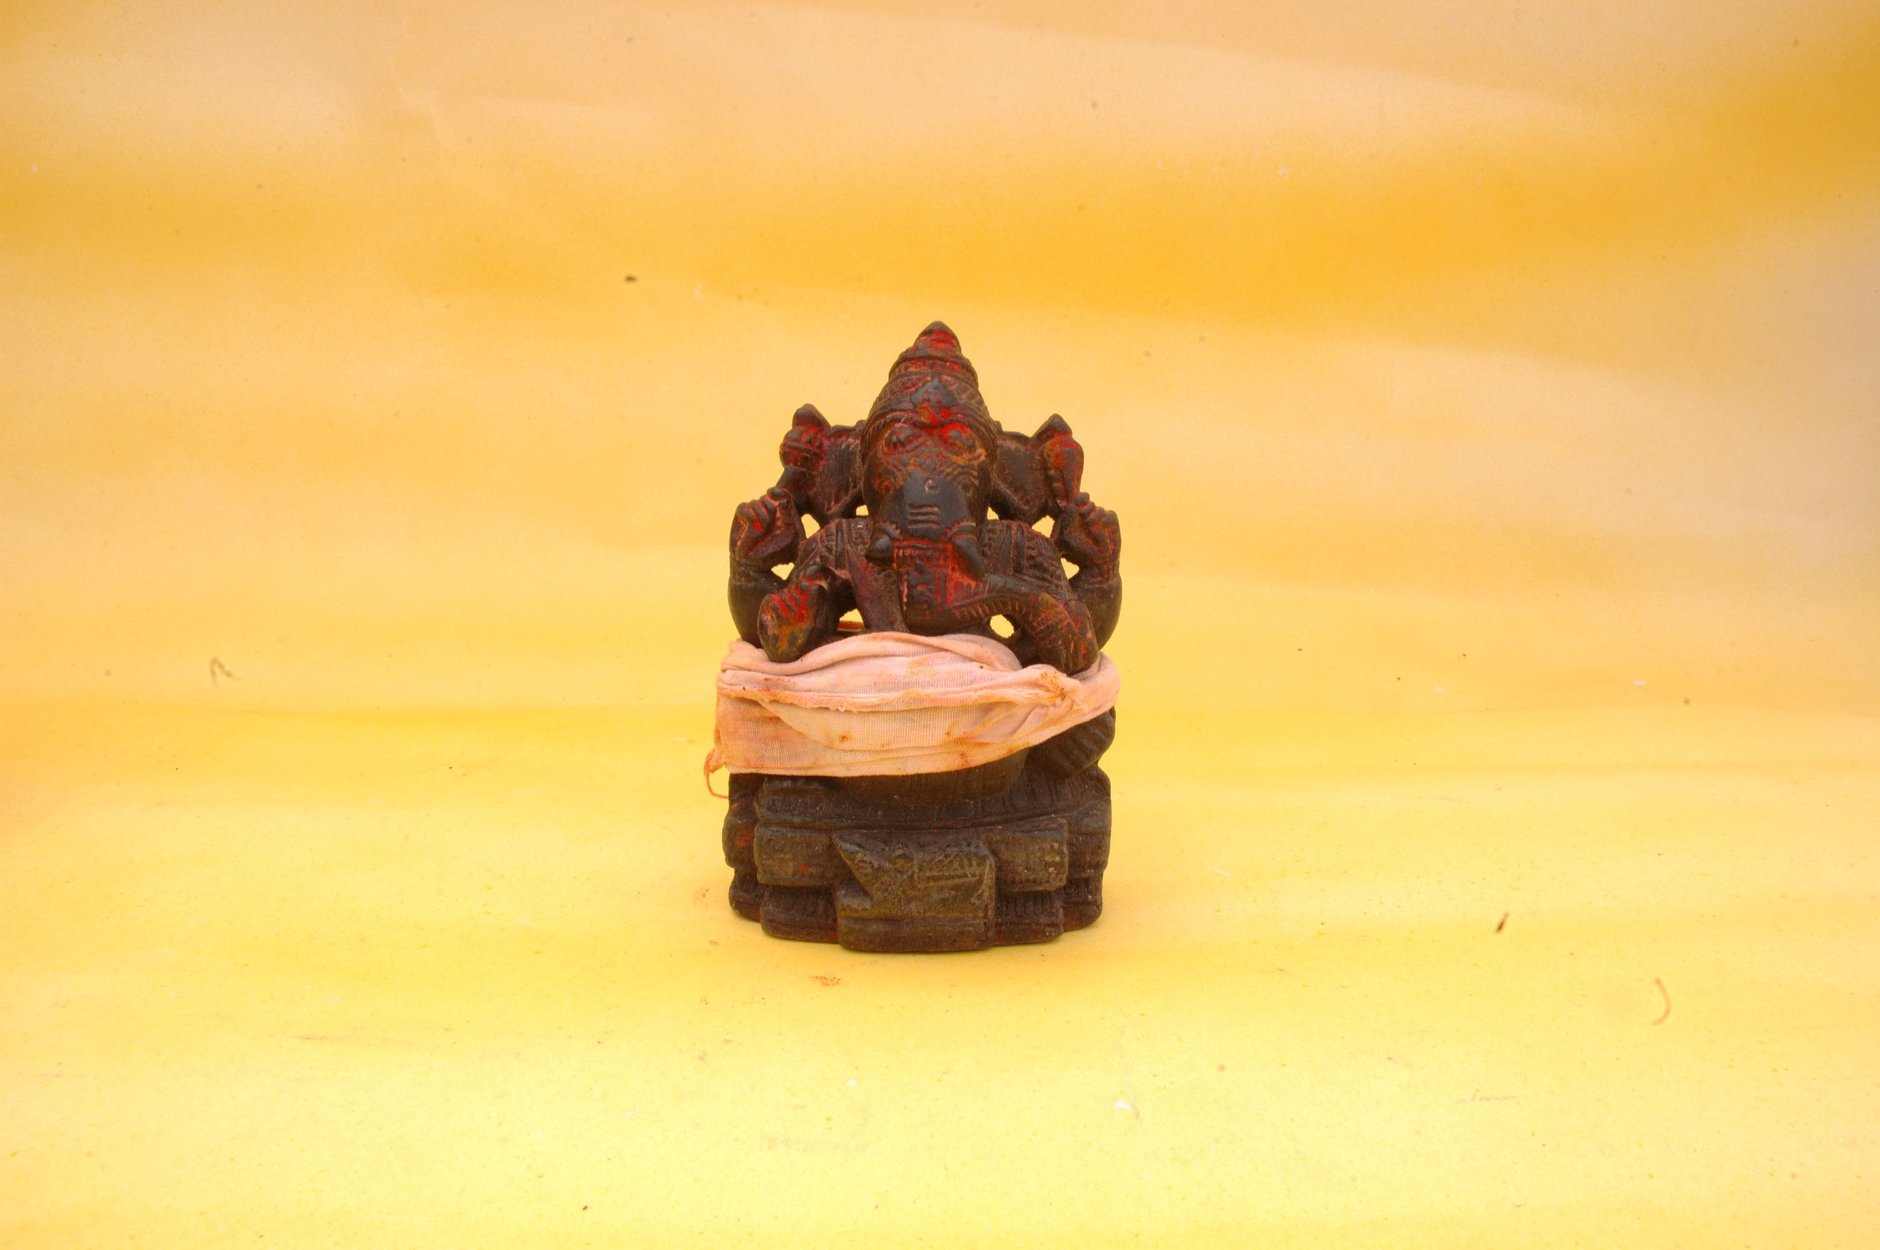 1982 | Ganesha deity made of stone used by The Avatār since age 4